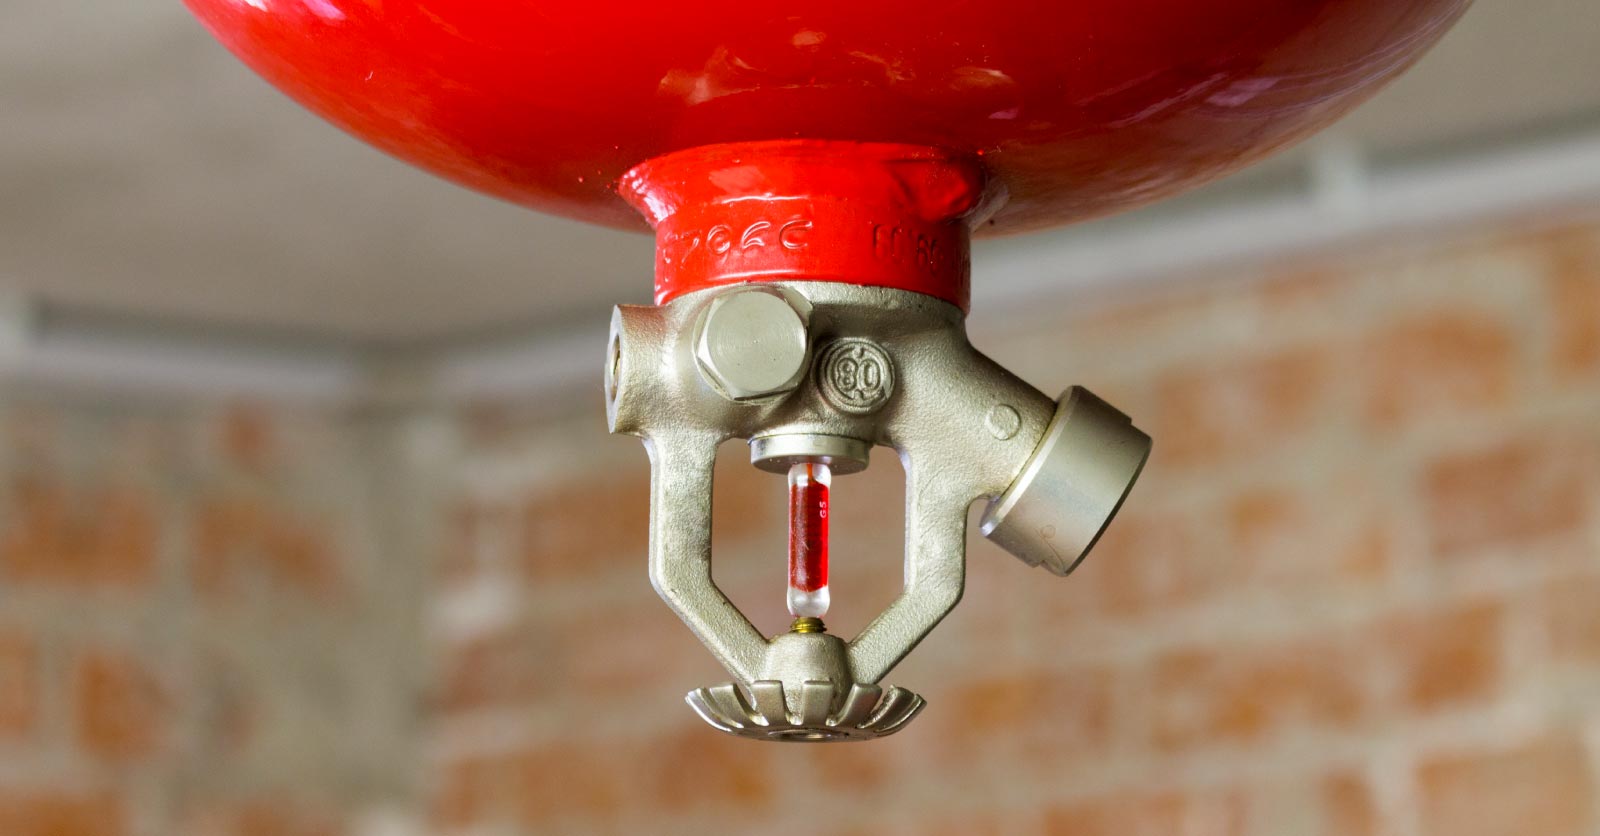 ARE YOU MAINTAINING YOUR FIRE PROTECTION SYSTEM SPRINKLER HEADS PROPERLY?